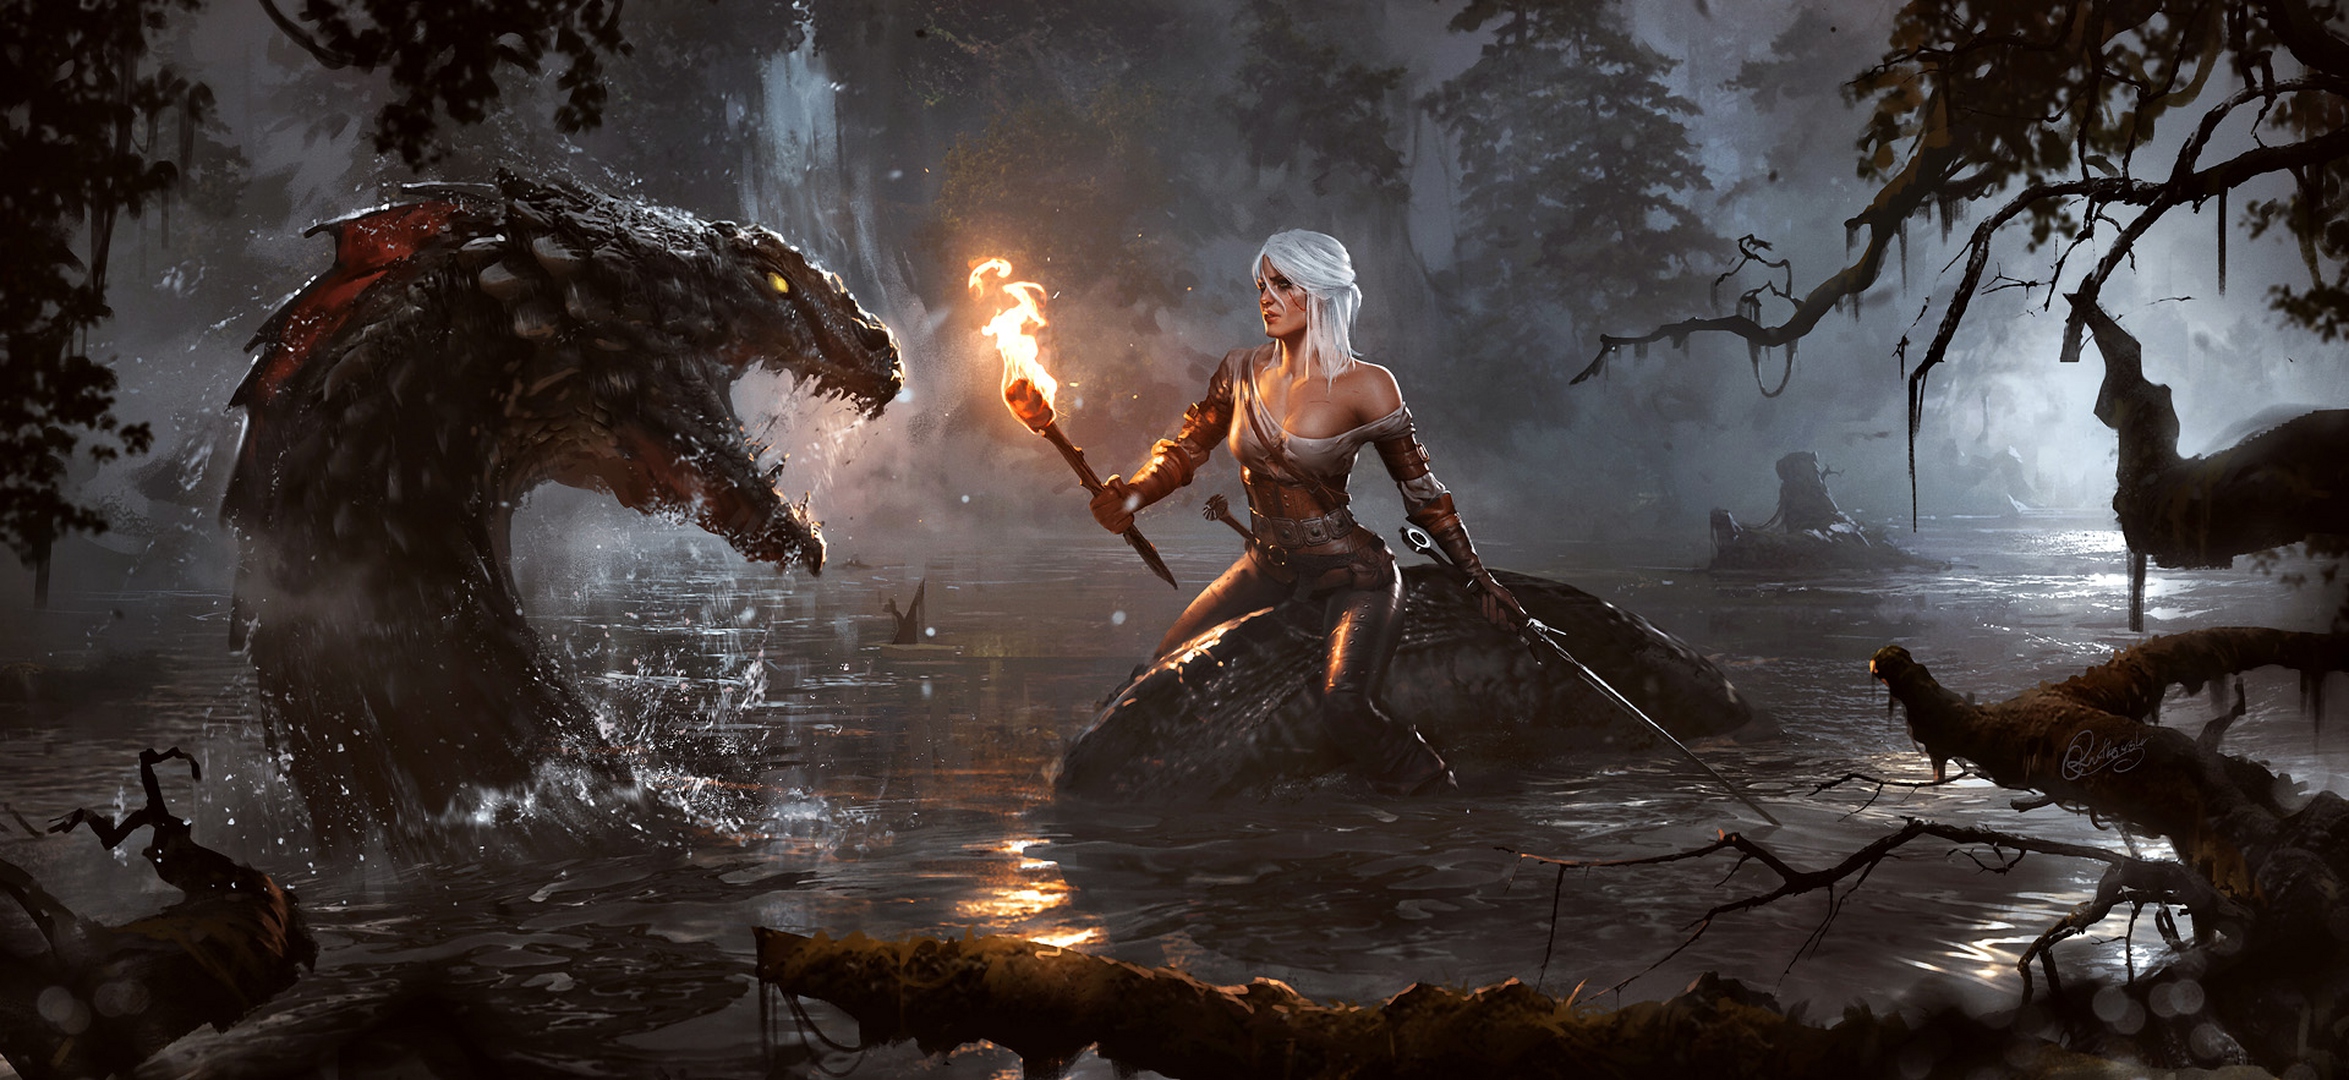 190+ Ciri (The Witcher) HD Wallpapers and Backgrounds